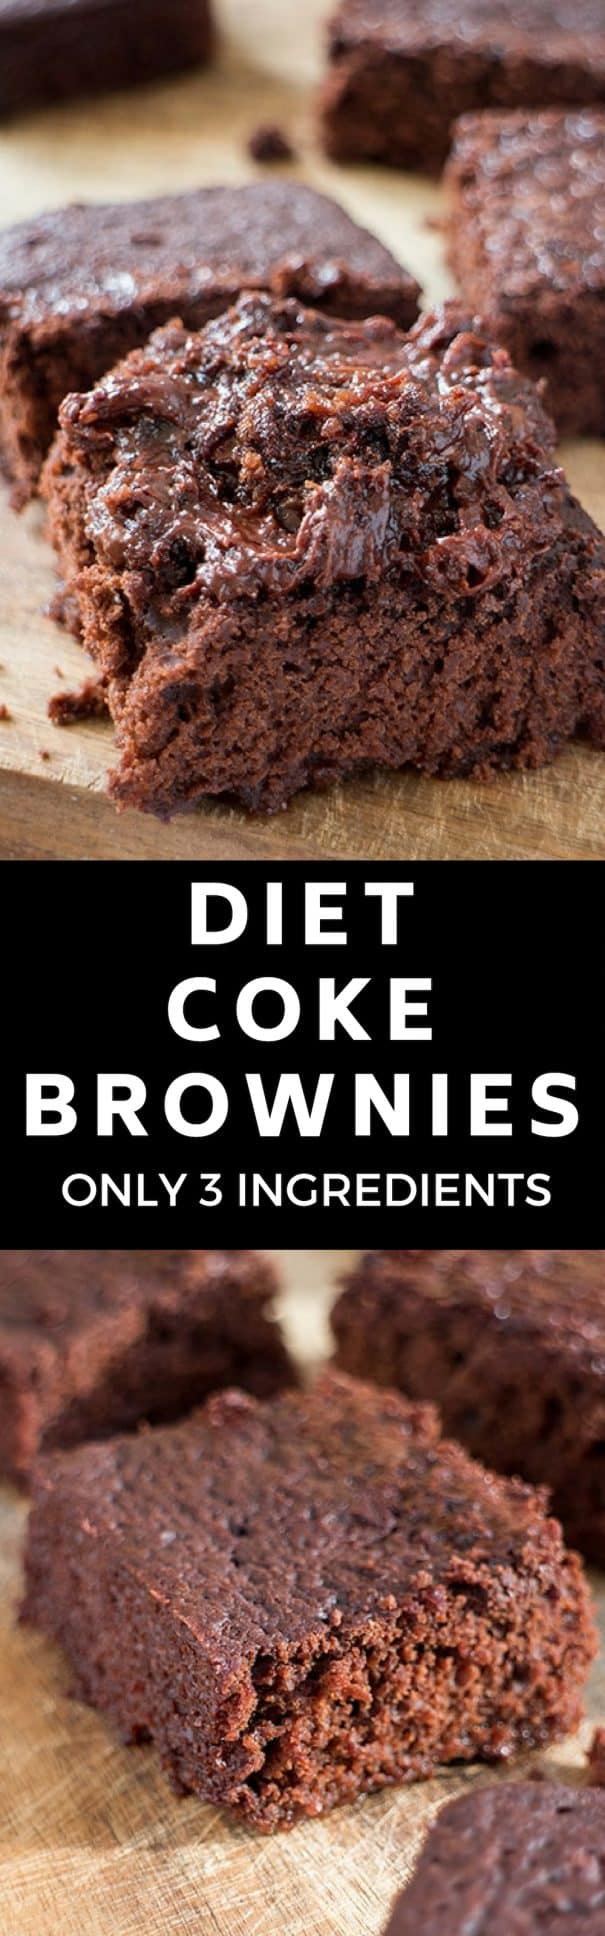 Easy to make Diet Coke Brownies recipe that only require 3 ingredients. These chocolate brownies are so fudgy!